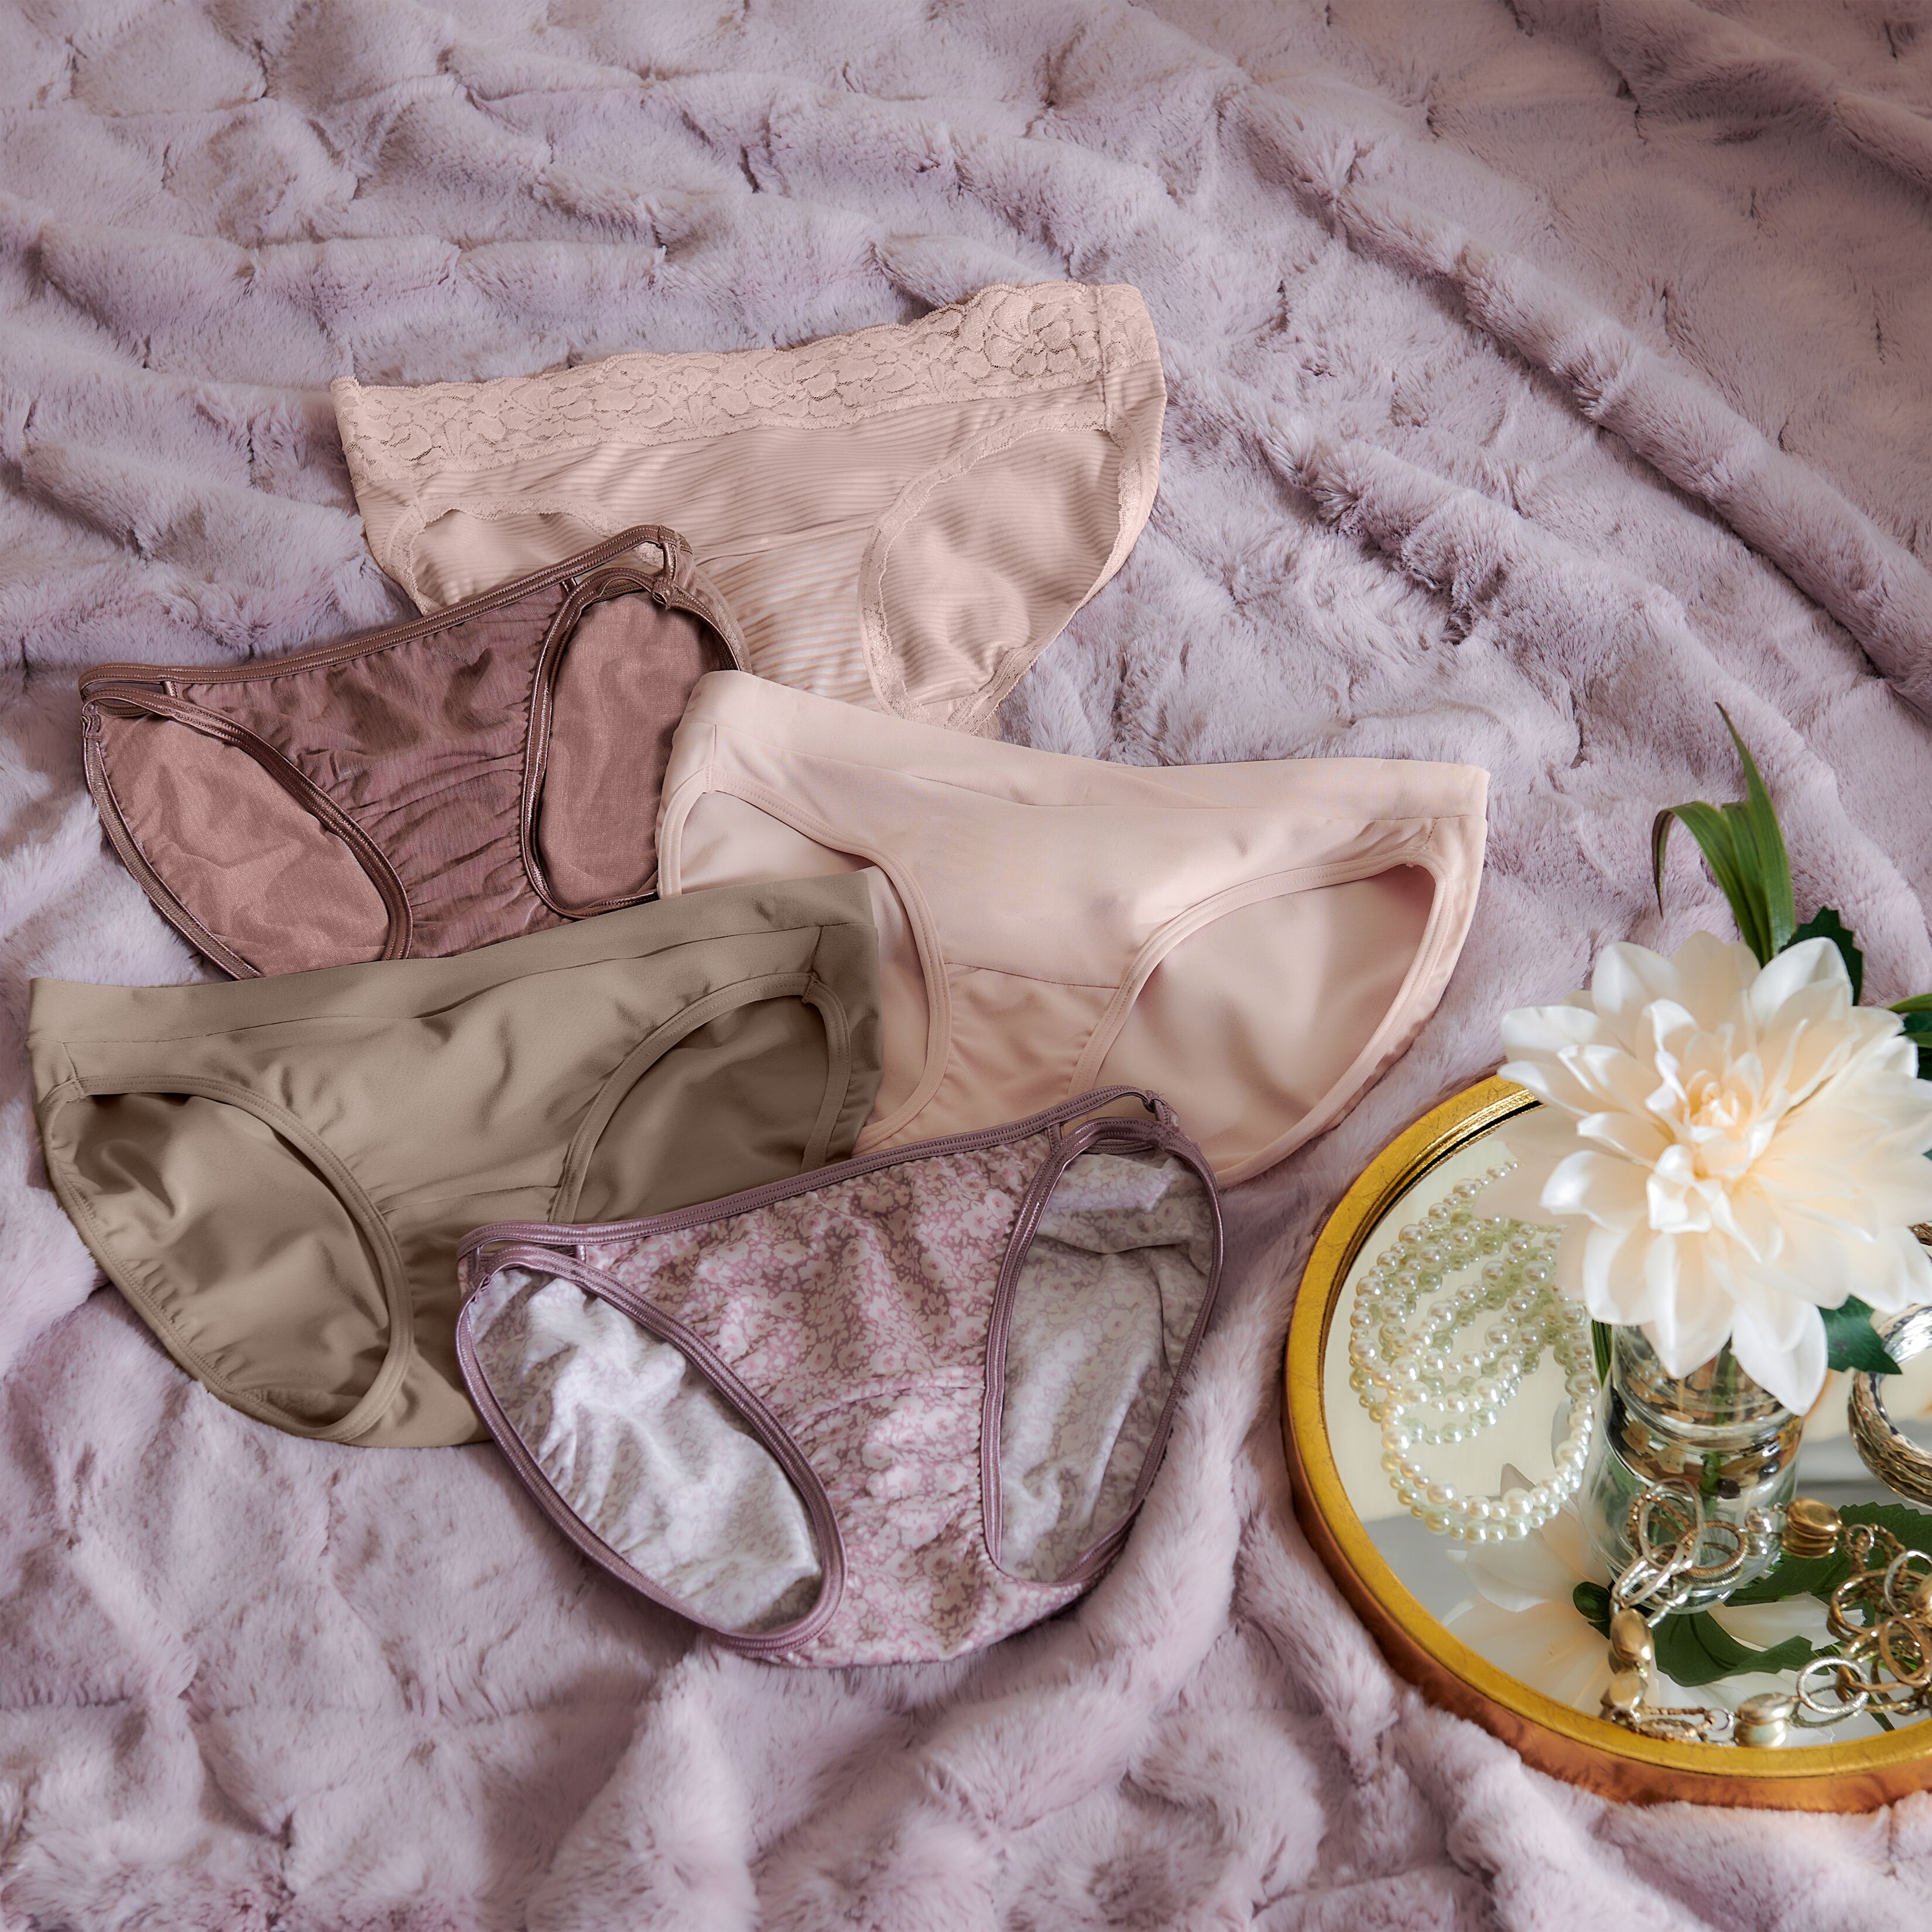 Vanity Fair Lingerie - It's here! Our Buy One, Get One Free, Give One sale  at Kohl's starts today, Thursday, September 14. Buy one bra, get a second  free, and we'll donate